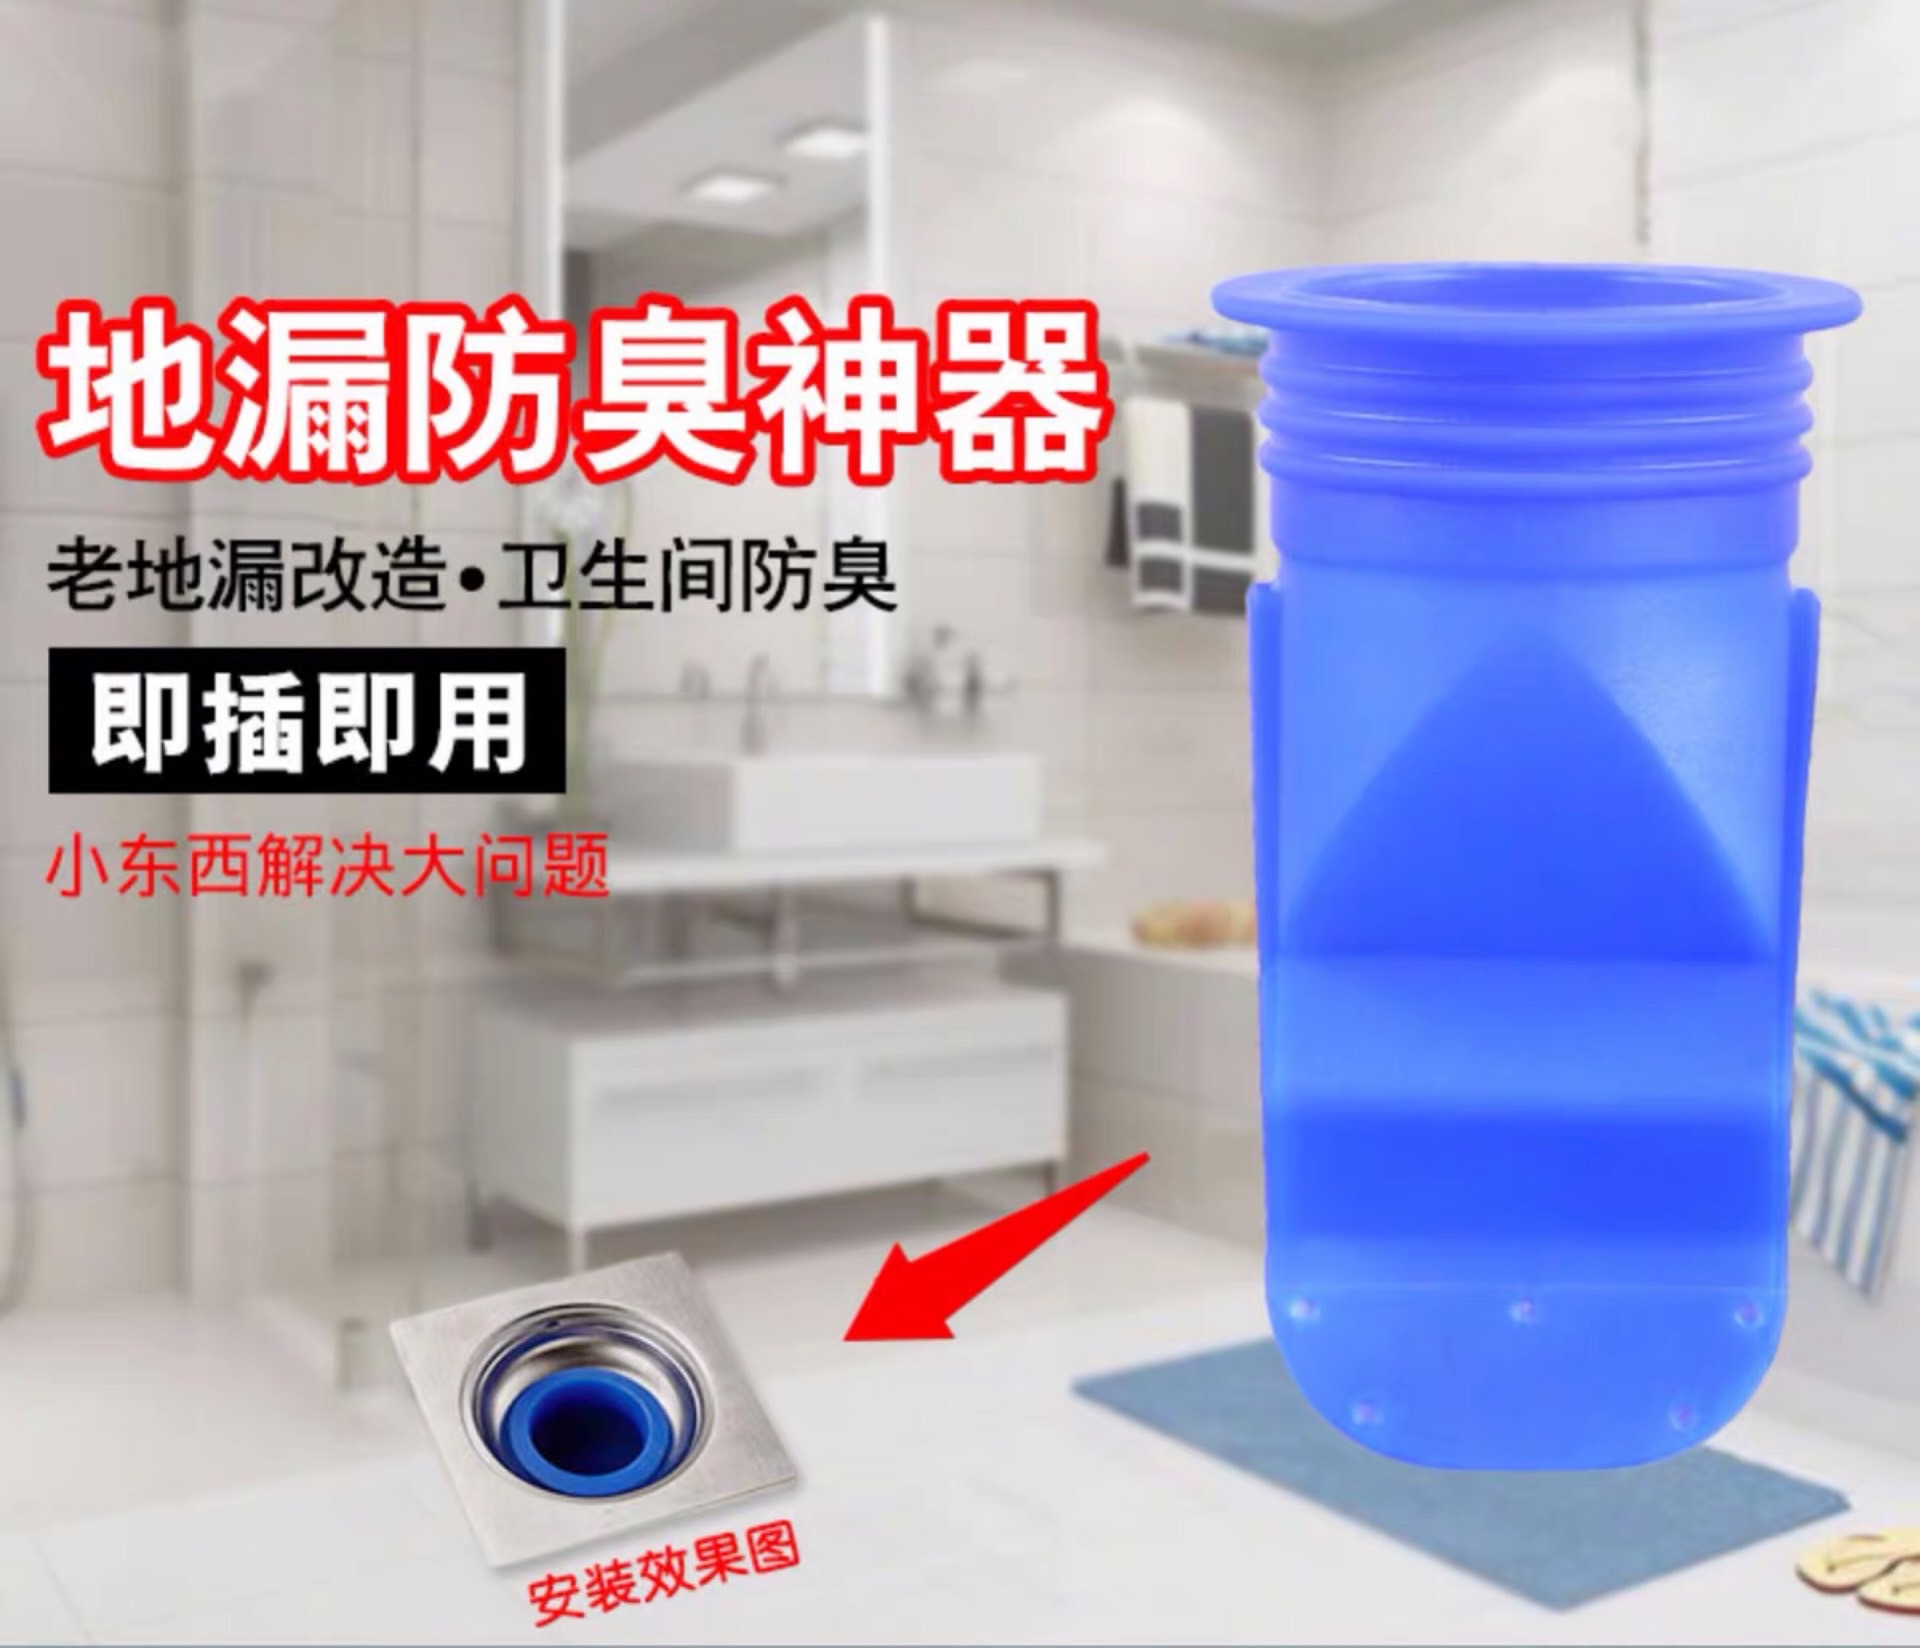 the floor drain Deodorant silica gel TOILET Be launched The Conduit seal ring Stainless steel Pest control Floor drain cover Inner core